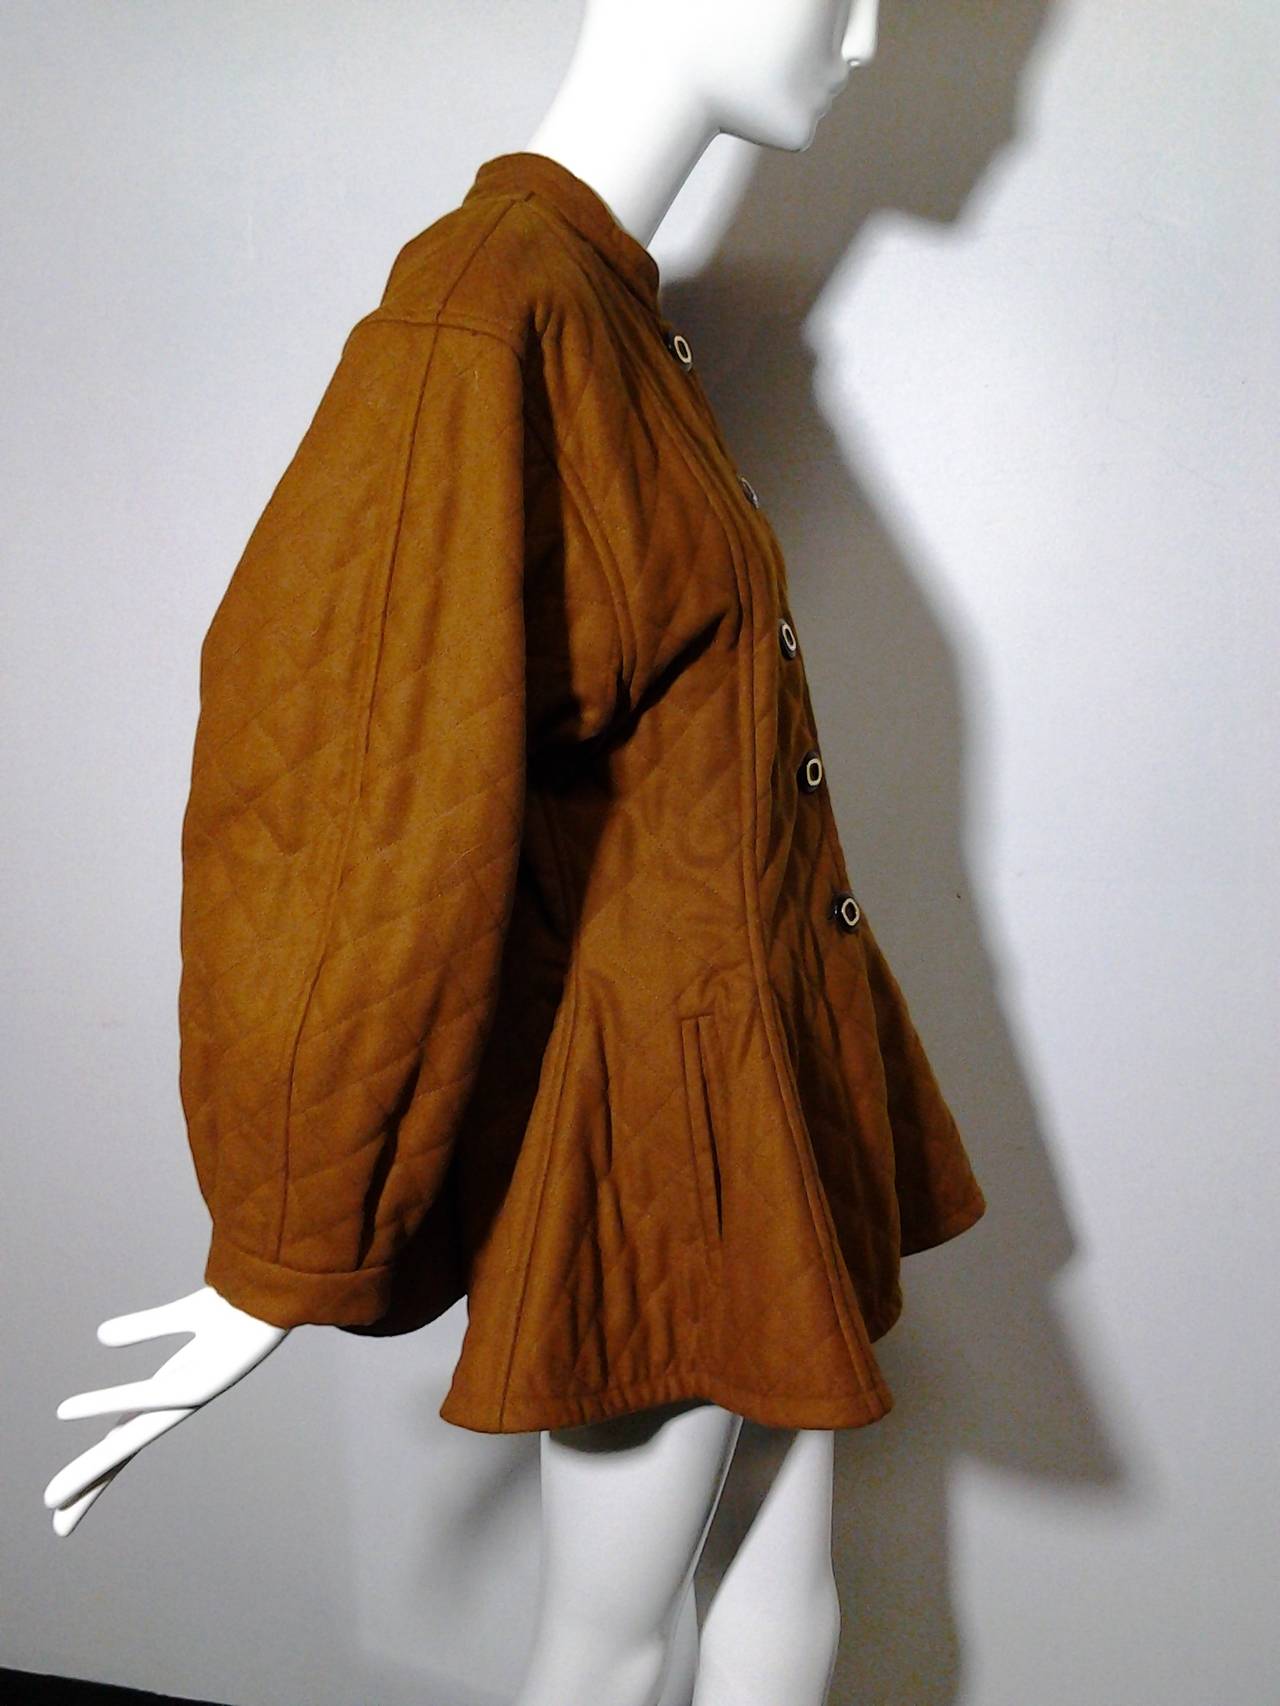 1980s Yves Saint Laurent quilted wool Moroccan-inspired wool coat:  felt-finished, nutmeg-color with peplum.  Real leather button front.  Inner lining is quilted with braid edge trim.  Balloon cuffs and front slash pockets.